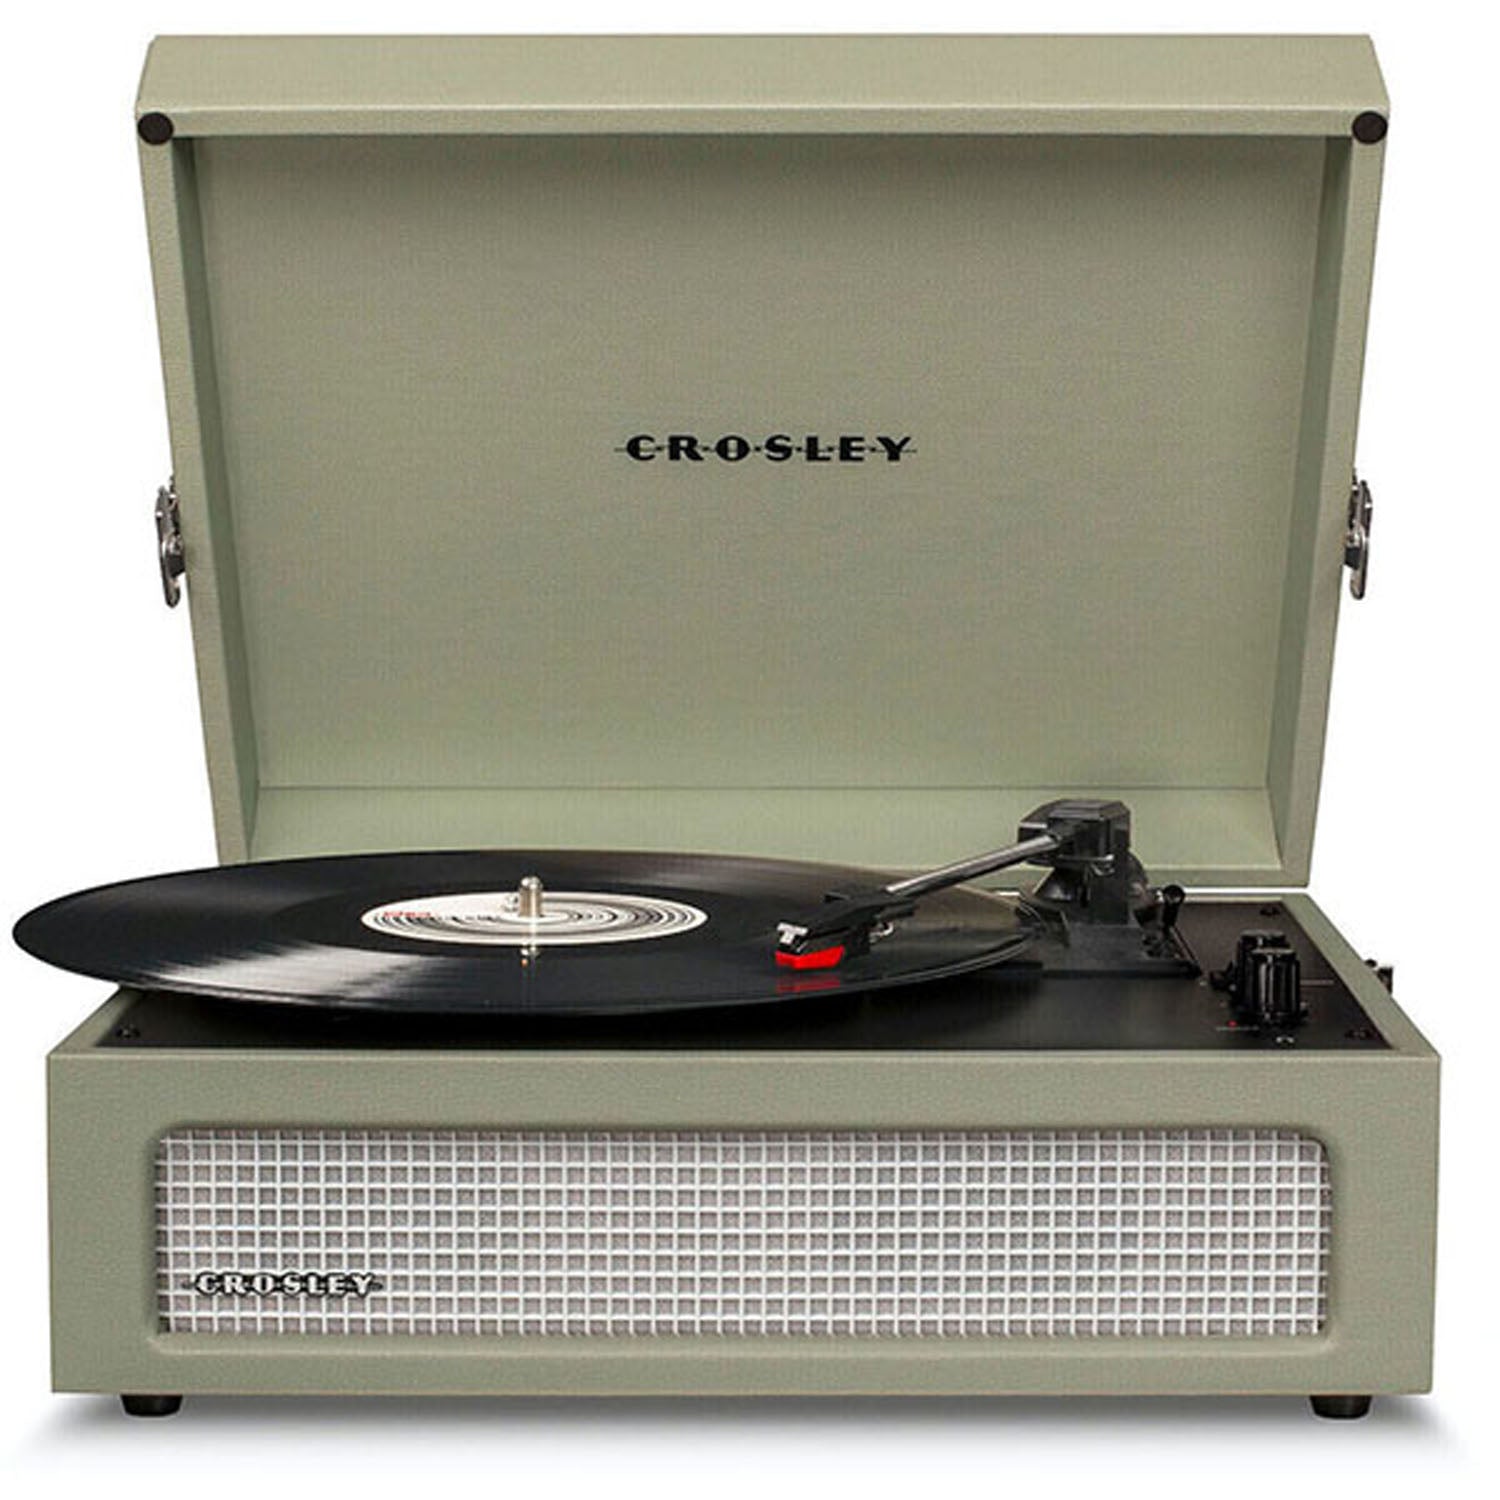 Crosley Voyager Portable Turntable with Bluetooth Receiver and Built-in Speakers - Sage - CR8017B-SA4 1 Shaws Department Stores